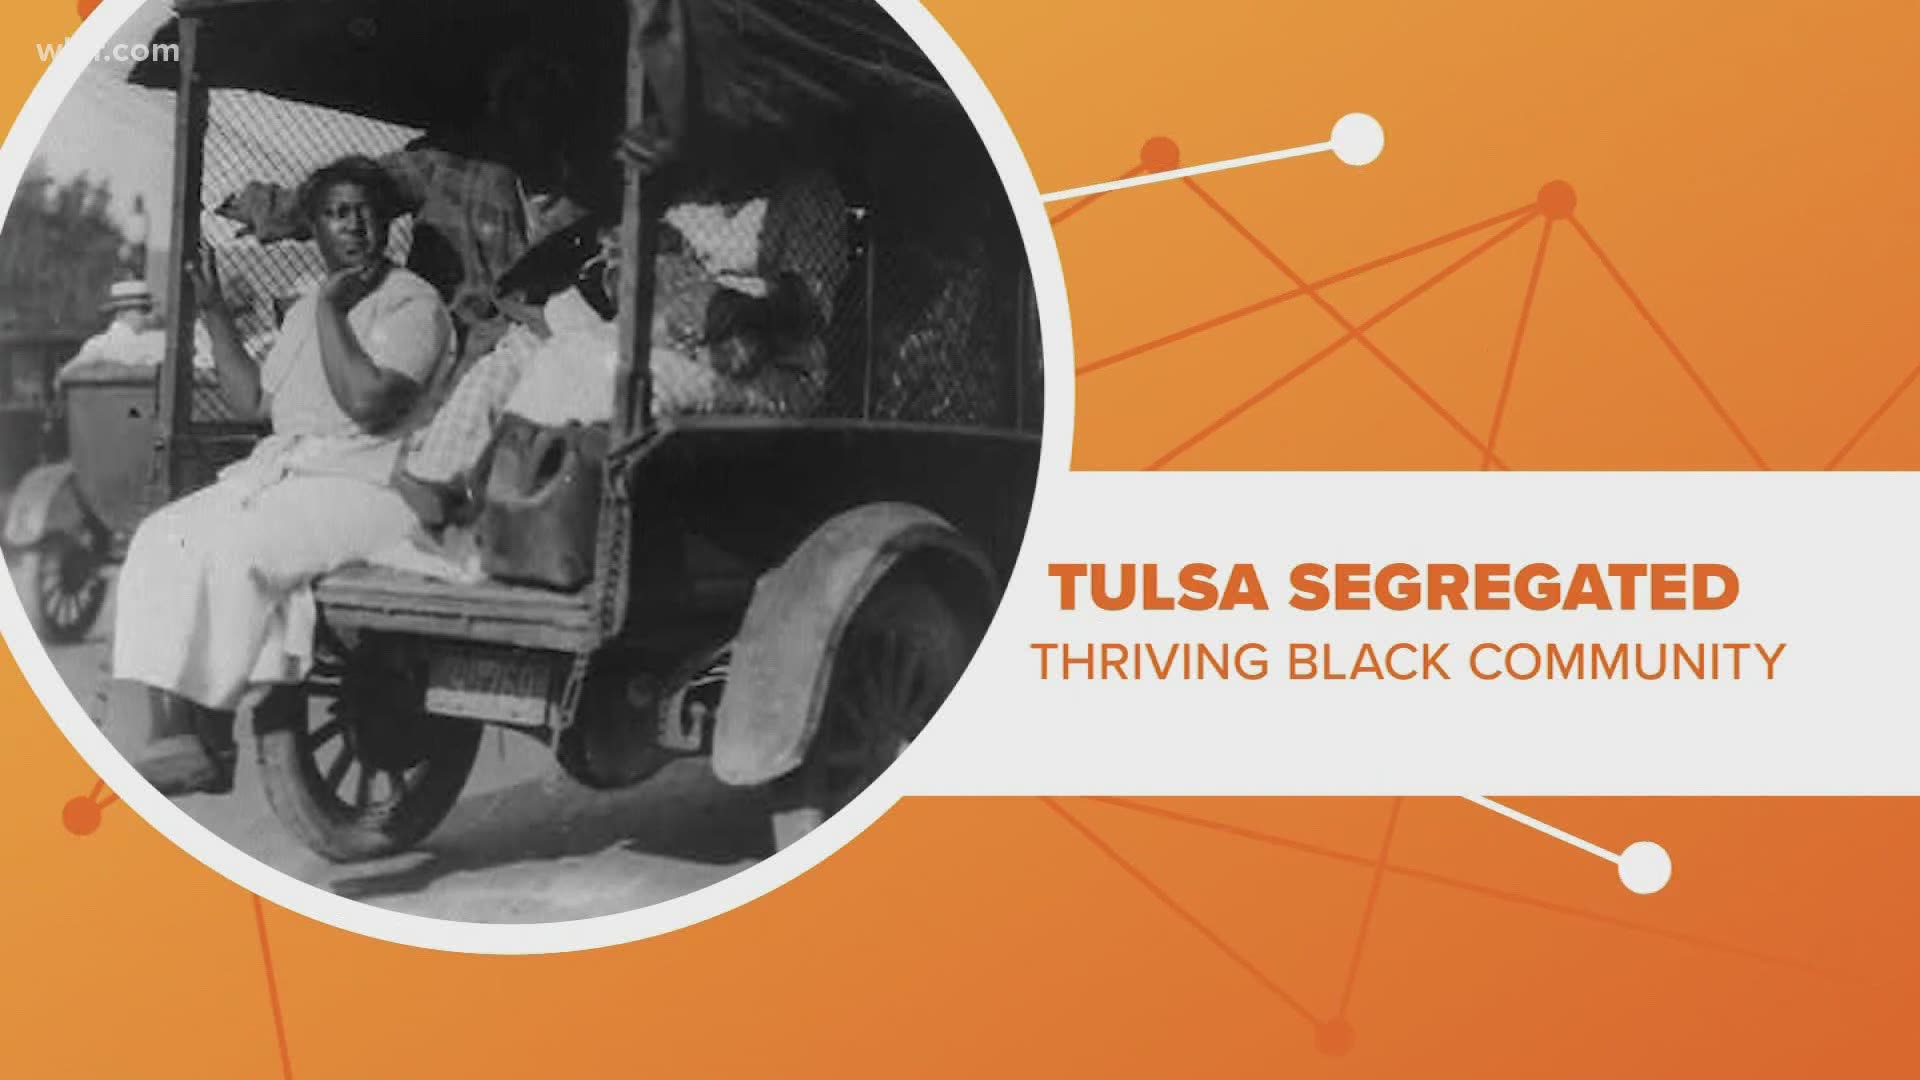 President Trump's planned rally in Tulsa has brought new attention to one of the most horrific moments in that city's history, the Tulsa Race Riots.